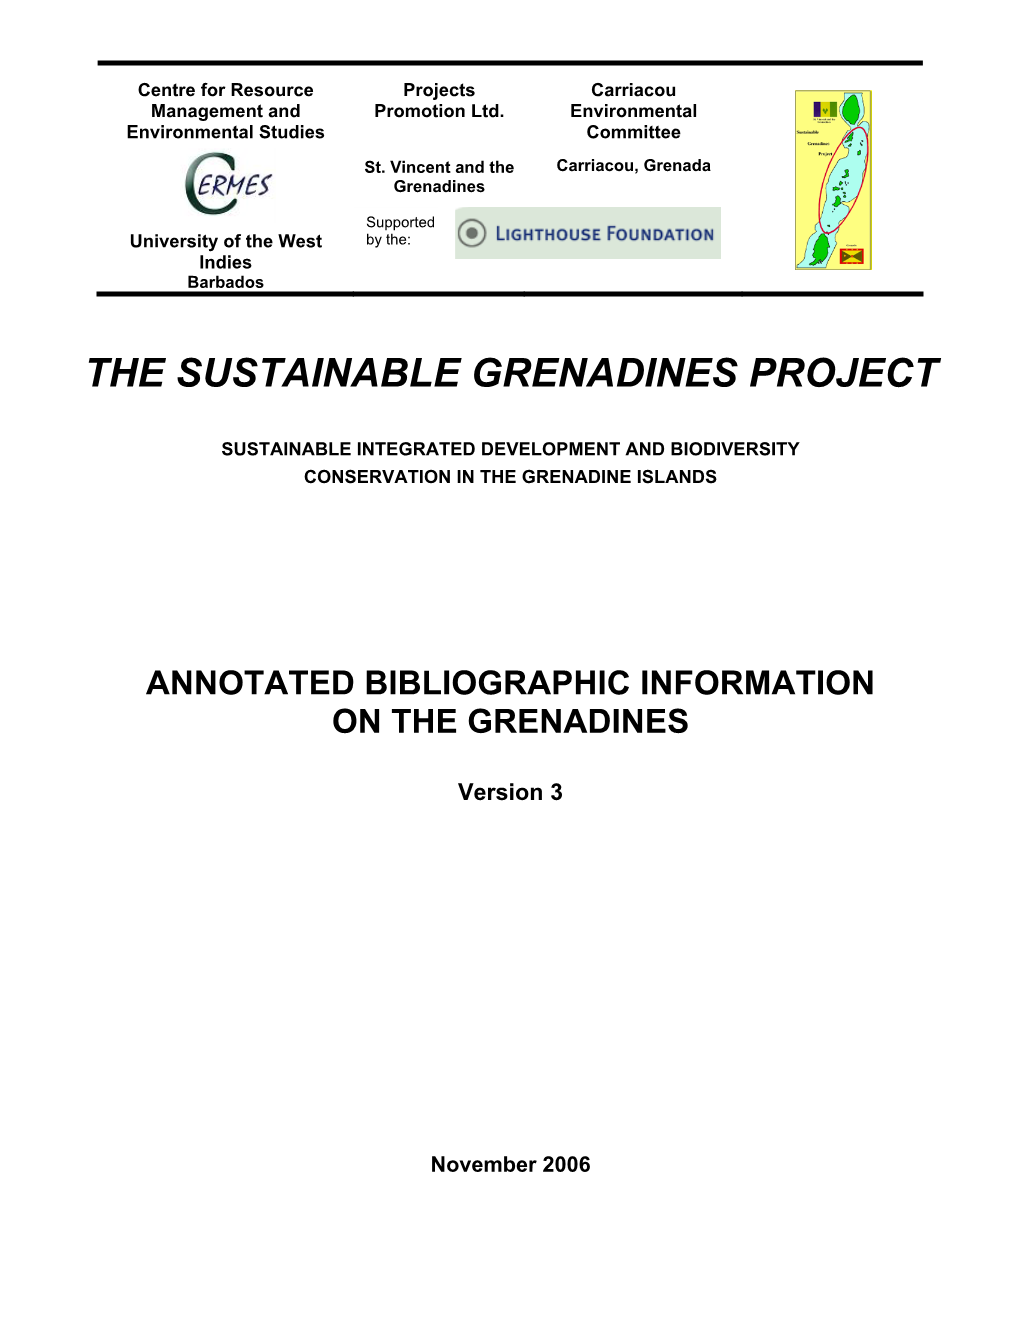 The Sustainable Grenadines Project